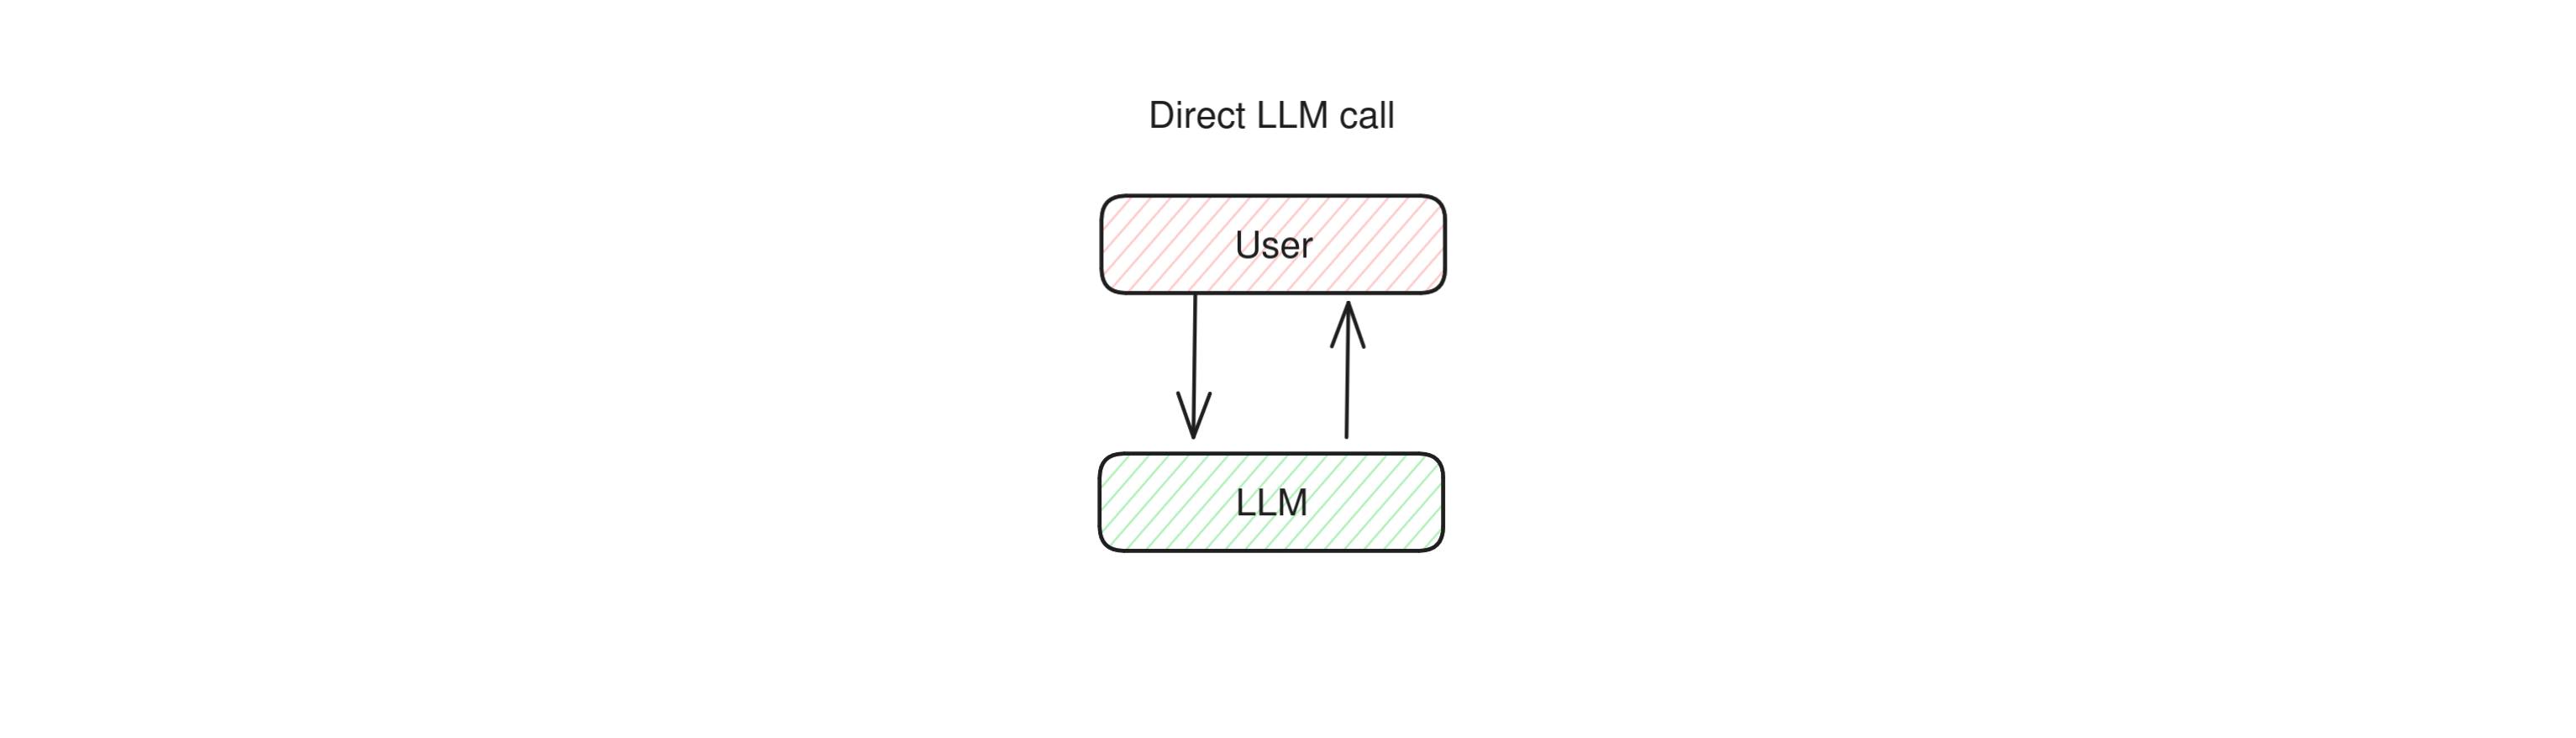 Diagram of the operation of a direct LLM call: a user asks a question to an LLM and the LLM replies directly.